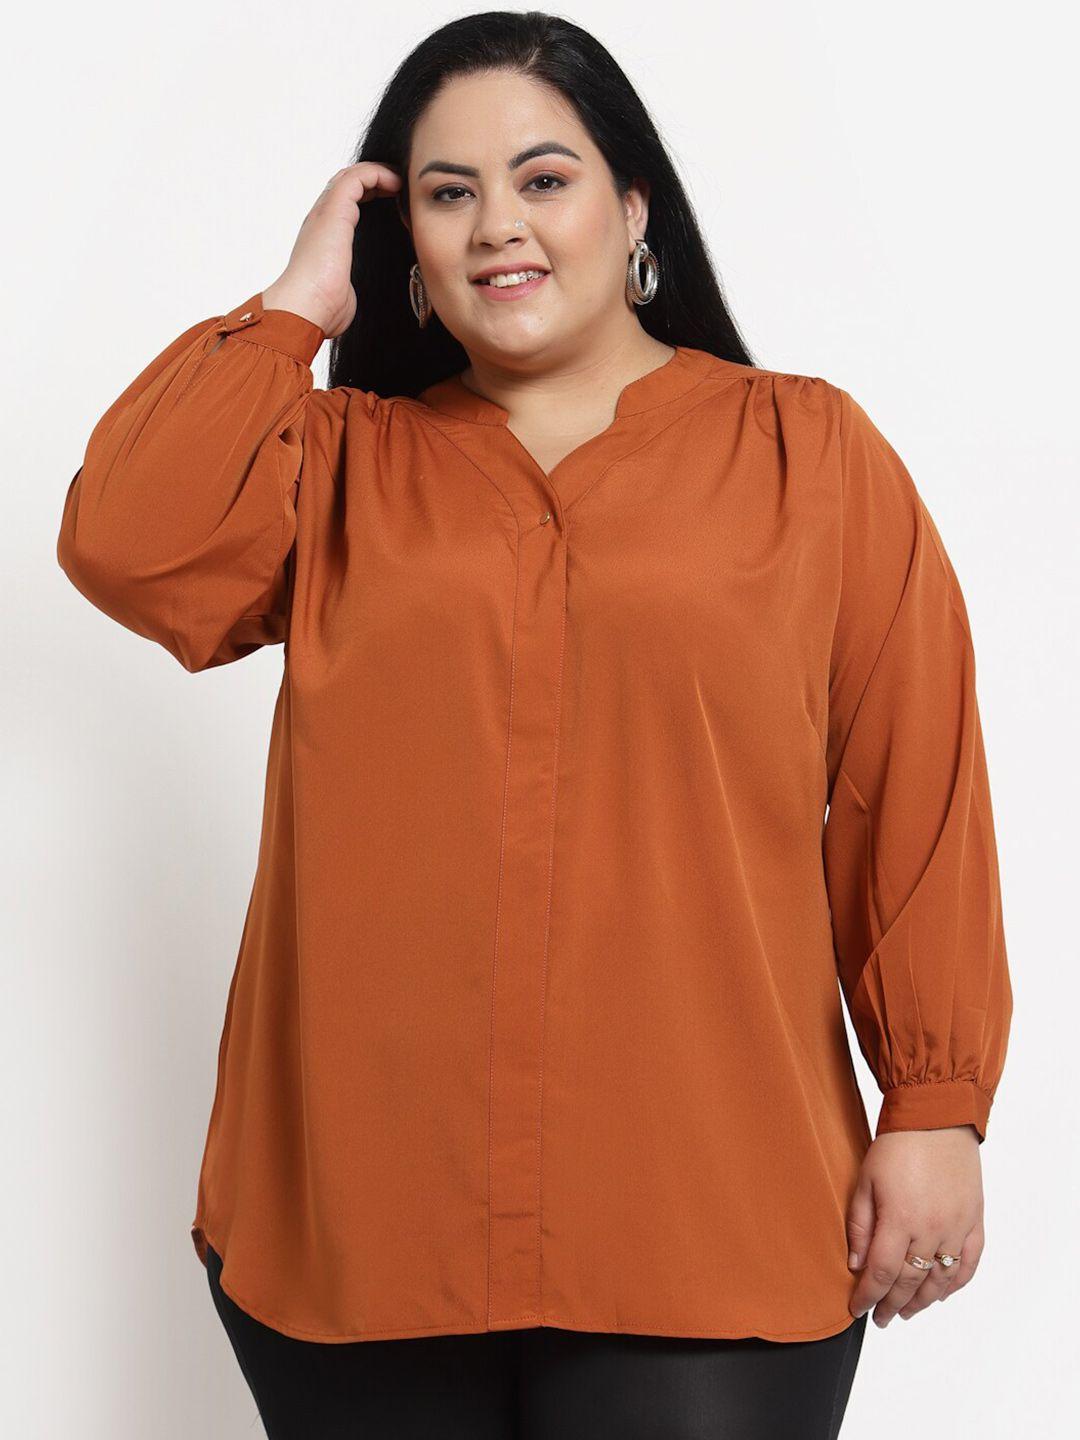 pluss plus size brown solid top